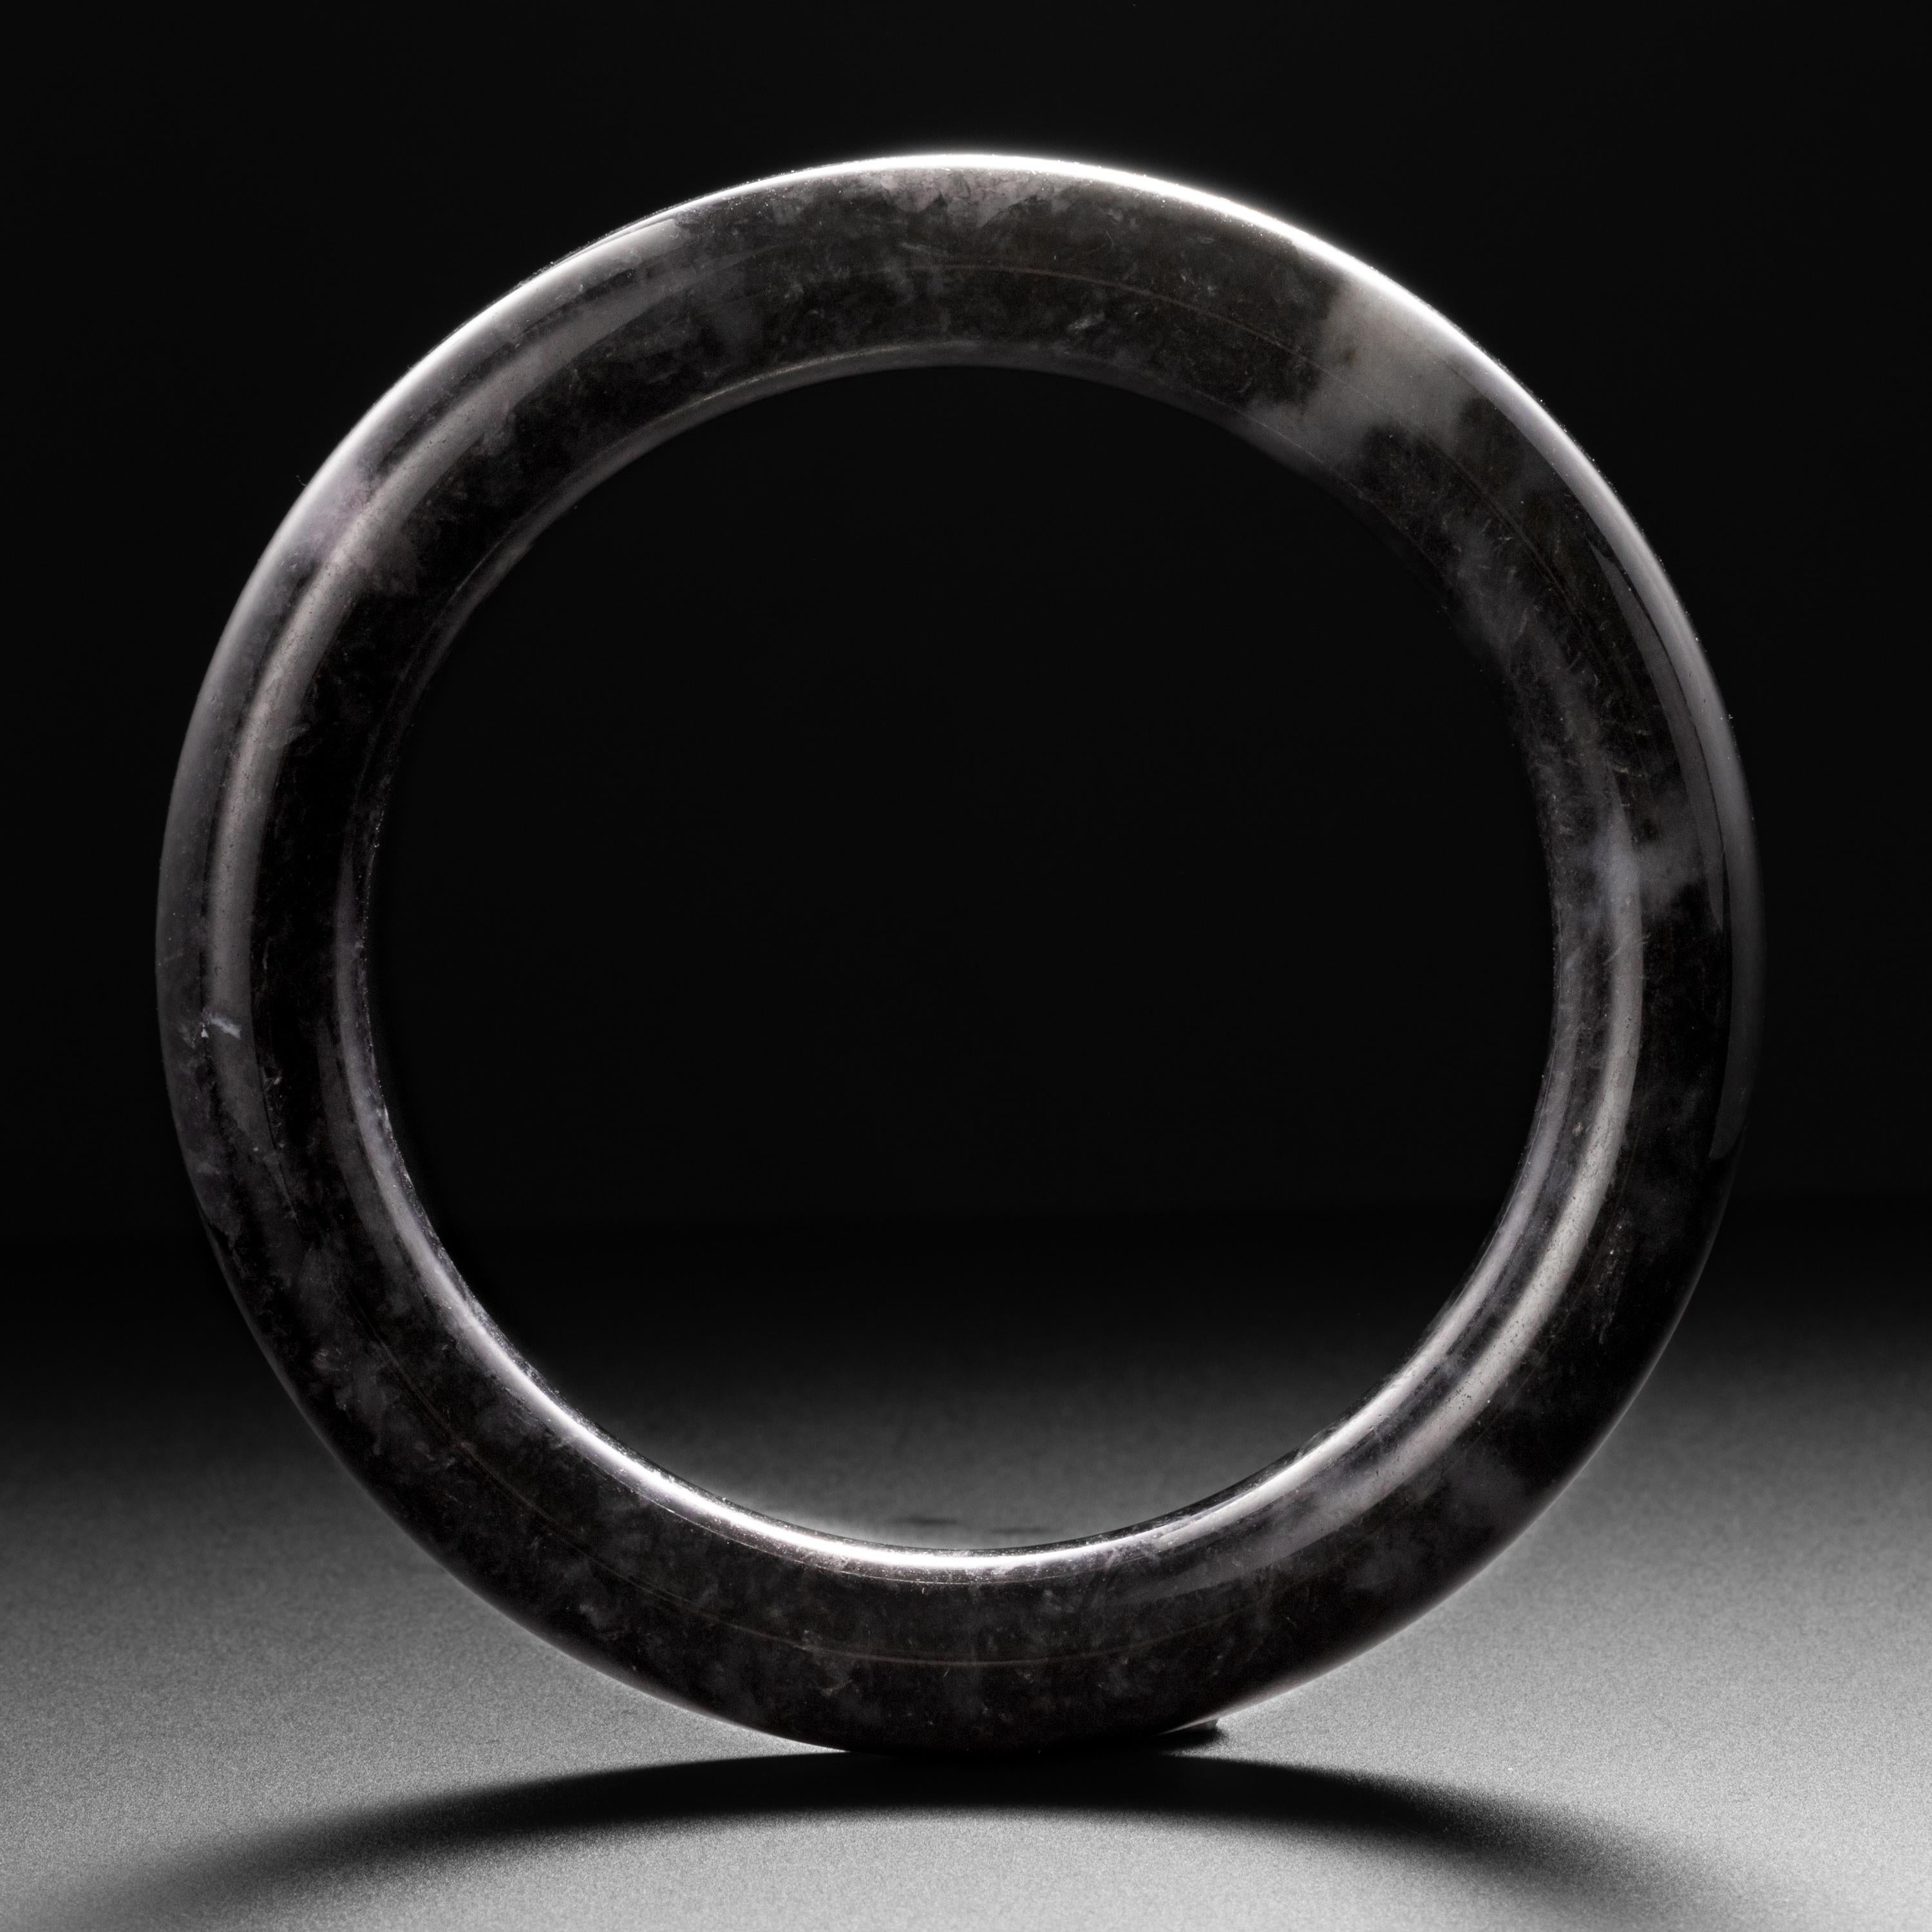 This large jade bangle possesses a brooding beauty. Not quite black, the dark gray jadeite jade bangle is infused in several areas with lighter, more translucent light gray/pale lavender jade. The contrast is striking. The bangle is surprisingly